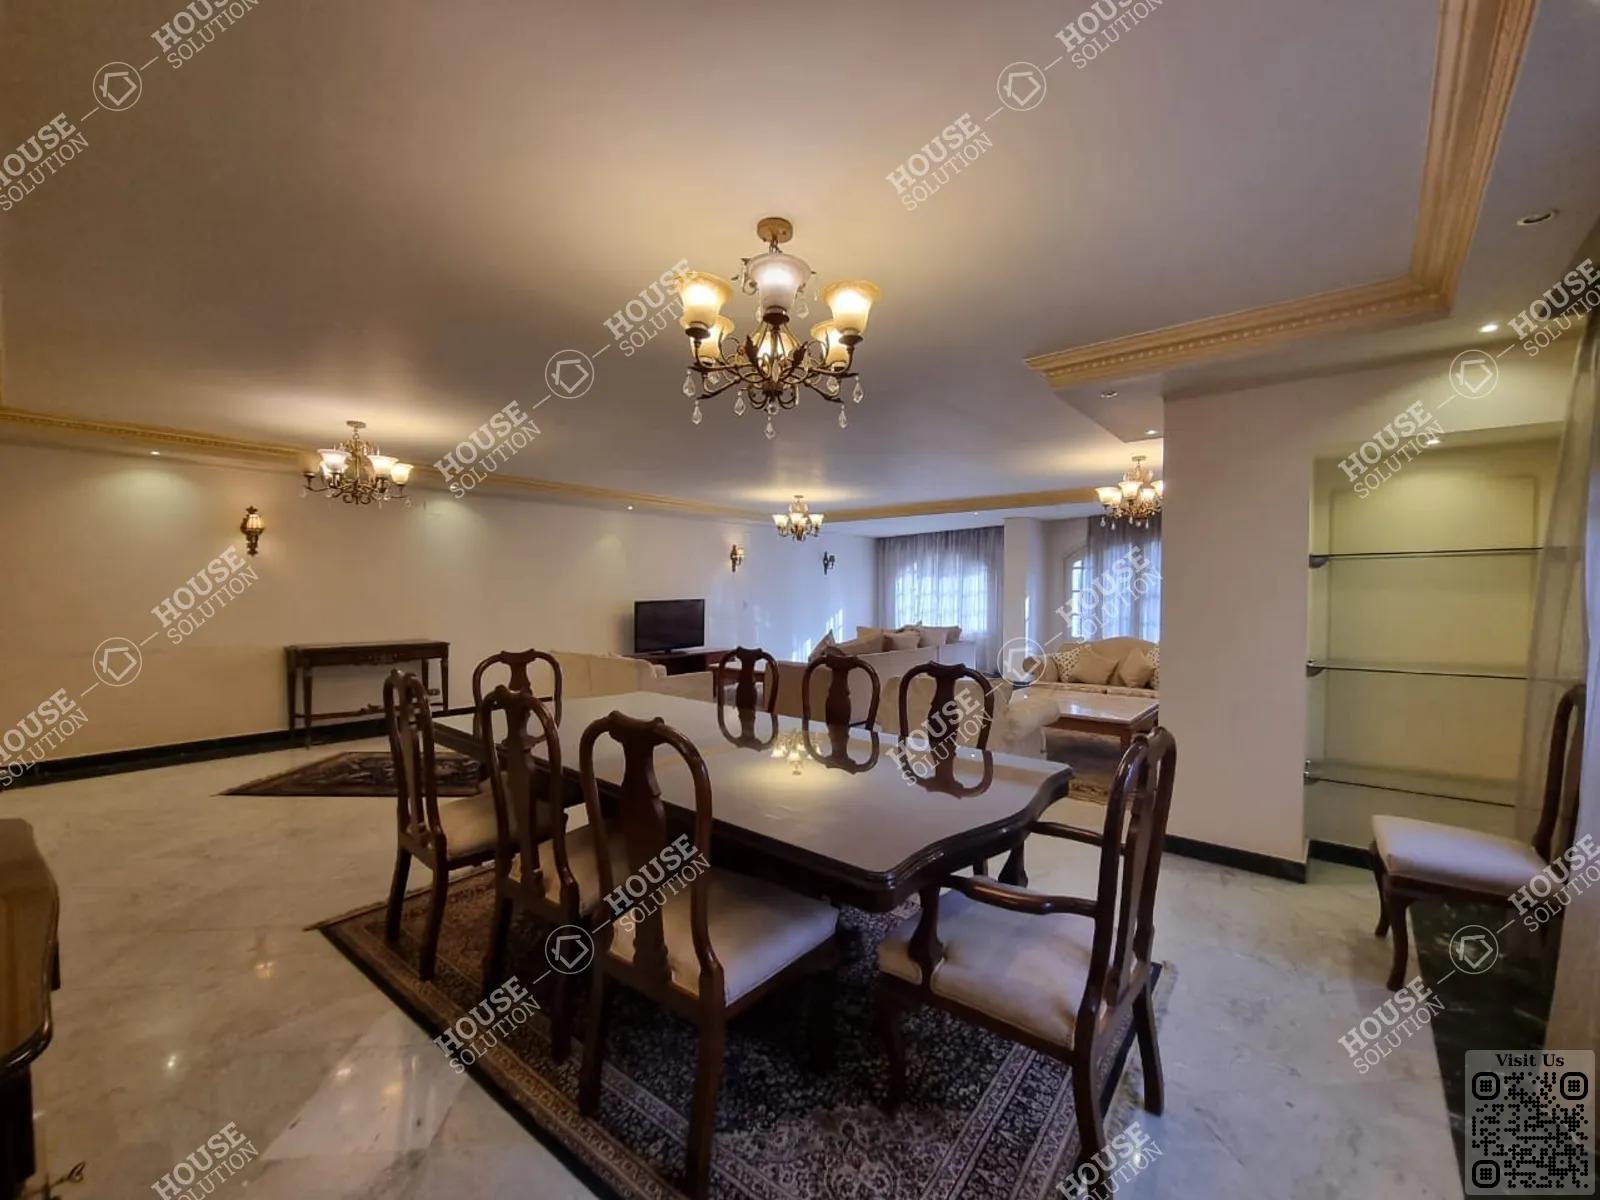 DINING AREA @ Apartments For Rent In Maadi Maadi Sarayat Area: 345 m² consists of 4 Bedrooms 3 Bathrooms Modern furnished 5 stars #5423-2